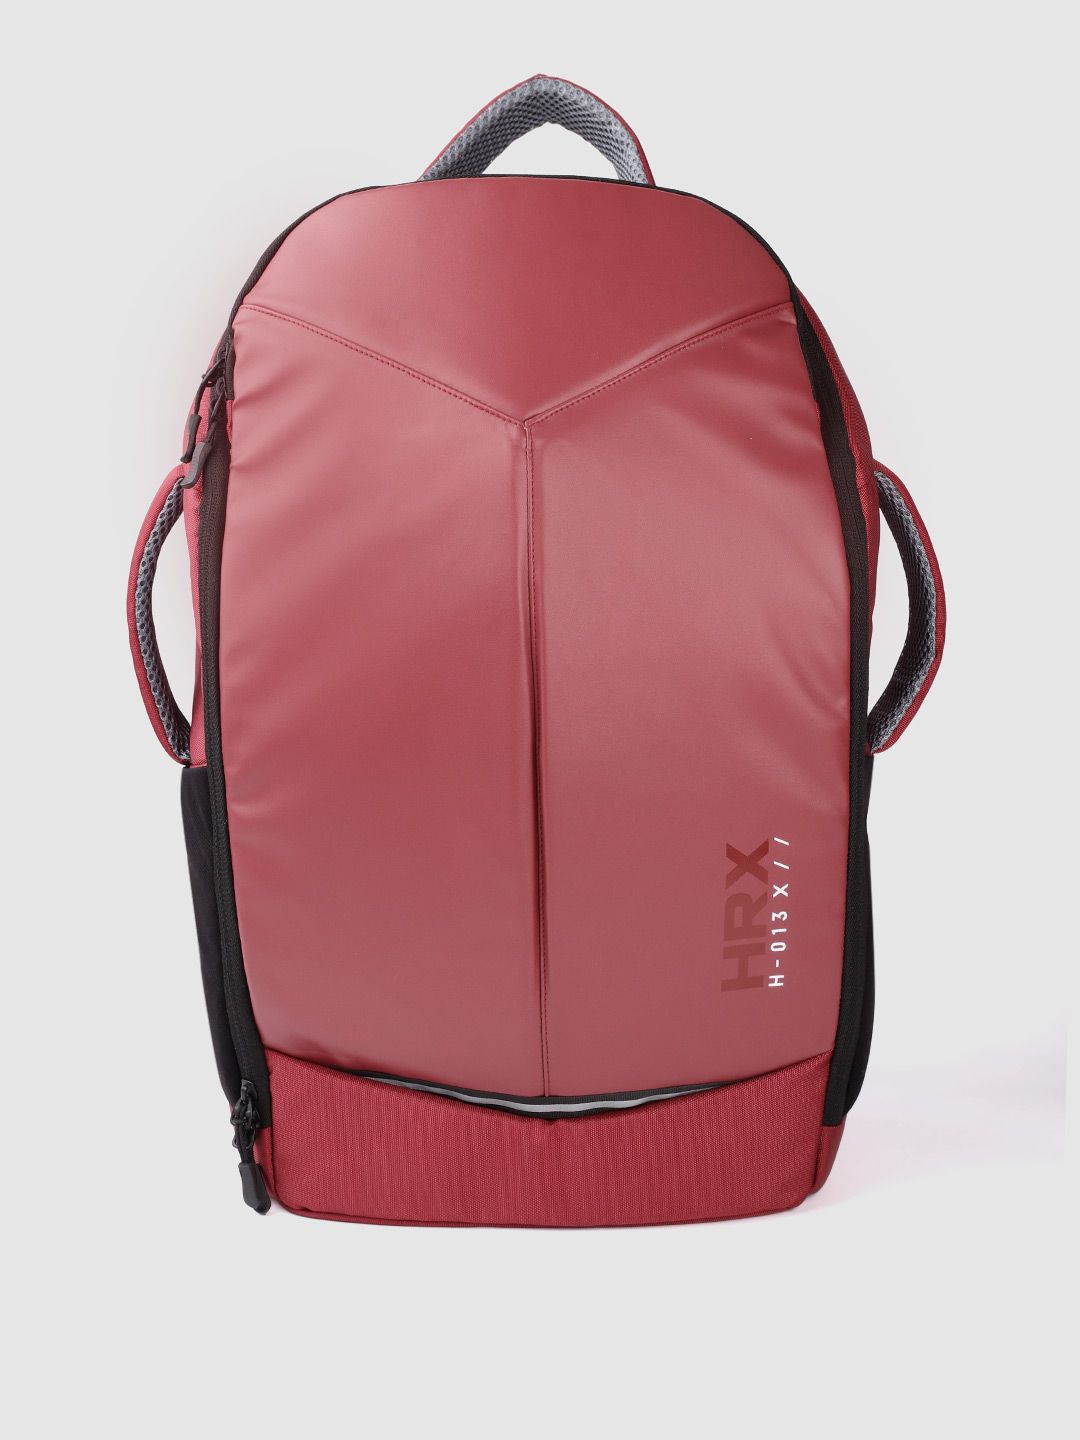 HRX by Hrithik Roshan Unisex Maroon & Black Brand Logo Backpack with Reflective Strip Price in India